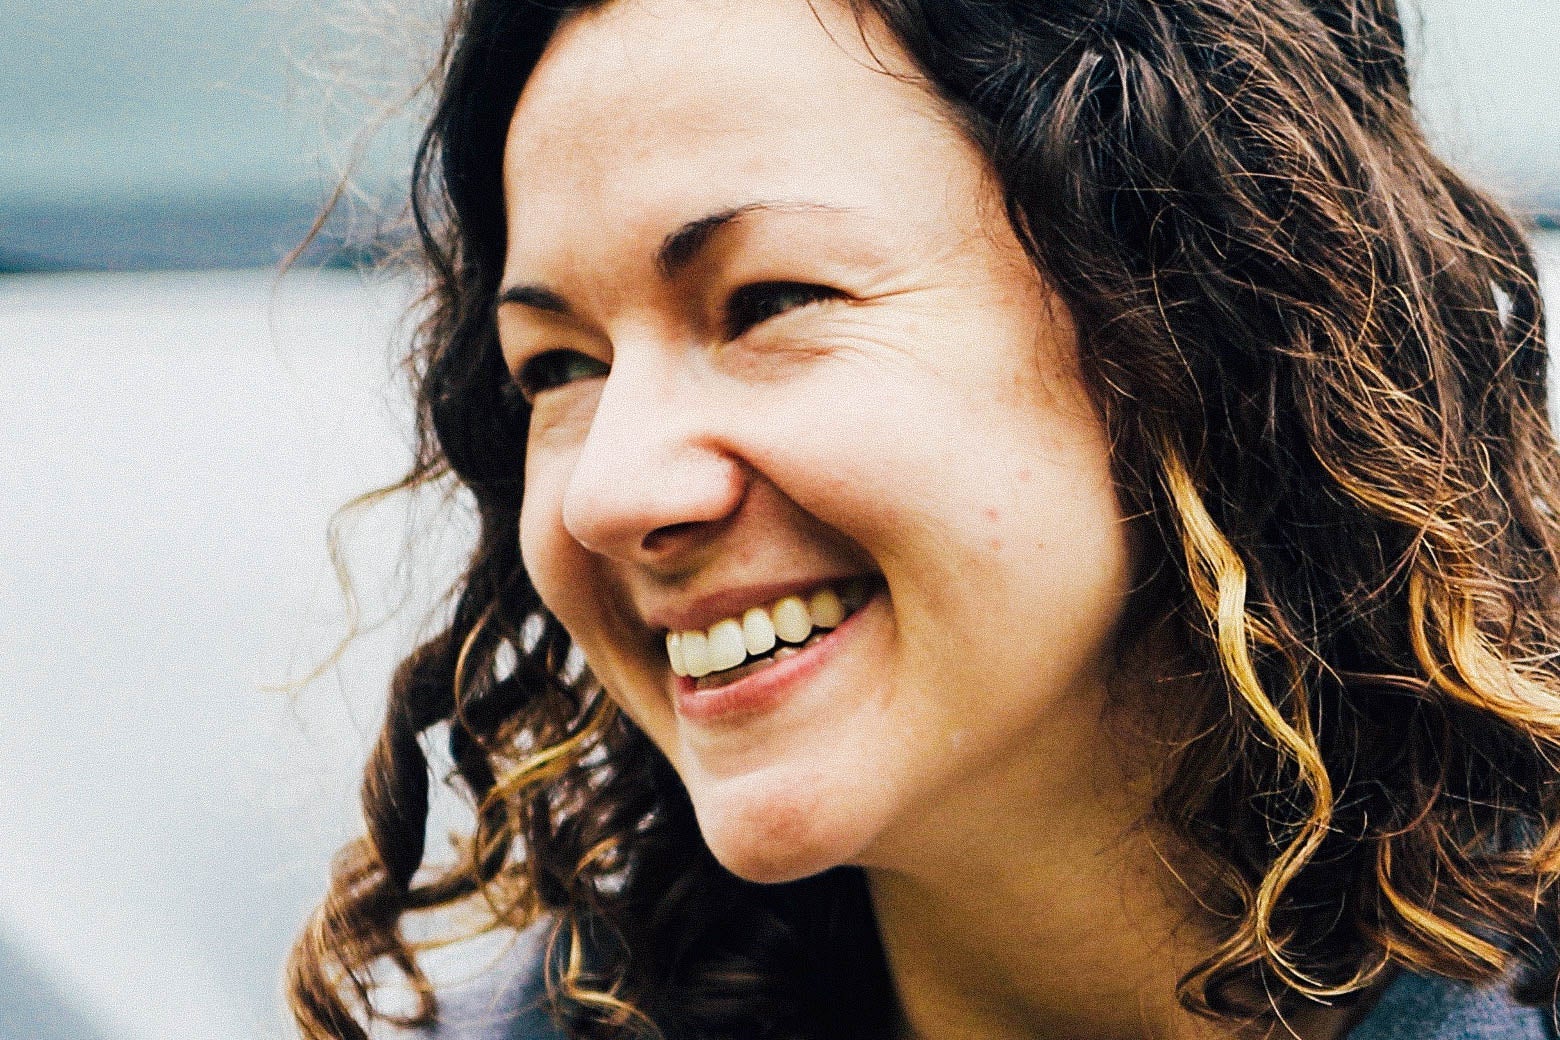 A woman with curly hair smiles as she looks off to the side.